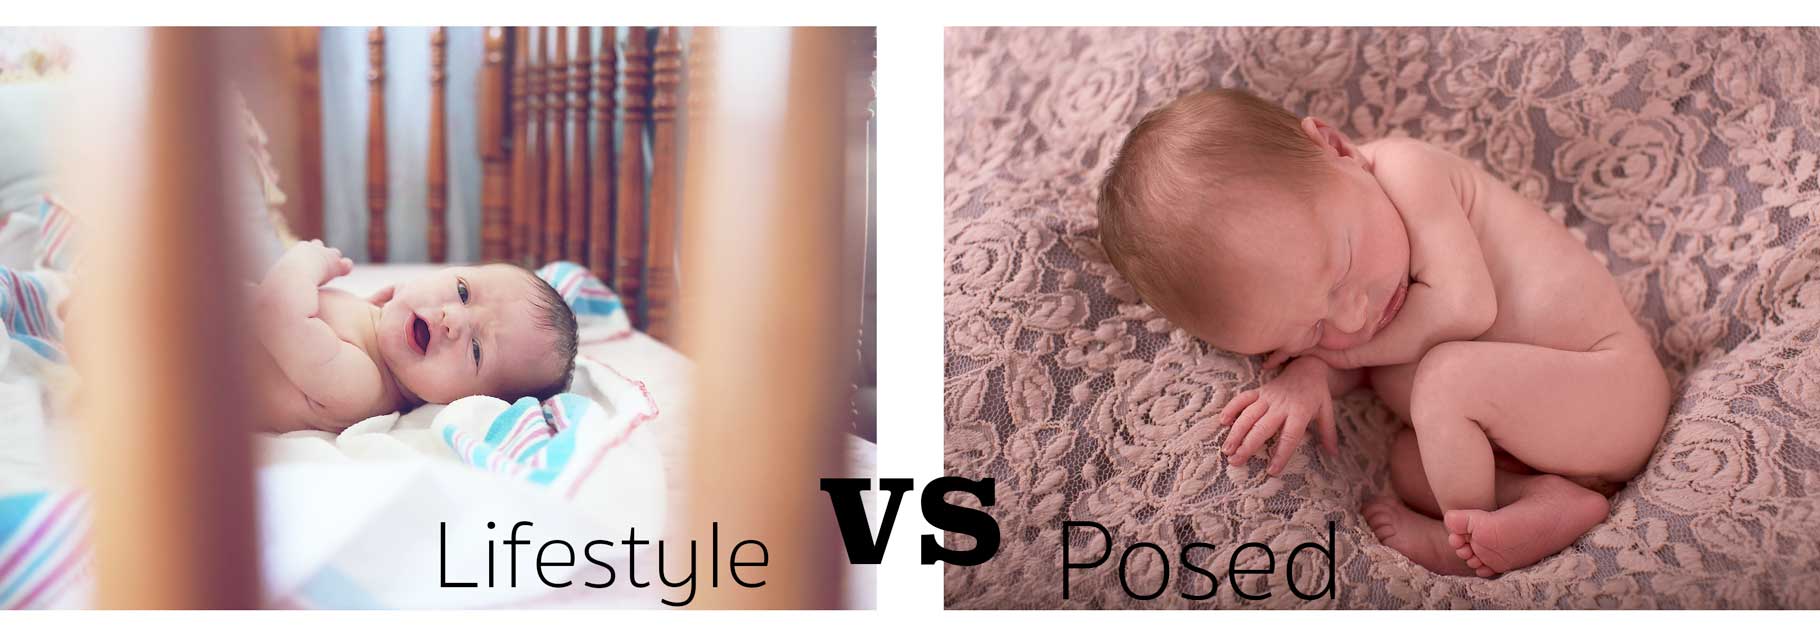 Image for blog lifestyle session vs posed newborn session with two babies pictures compared